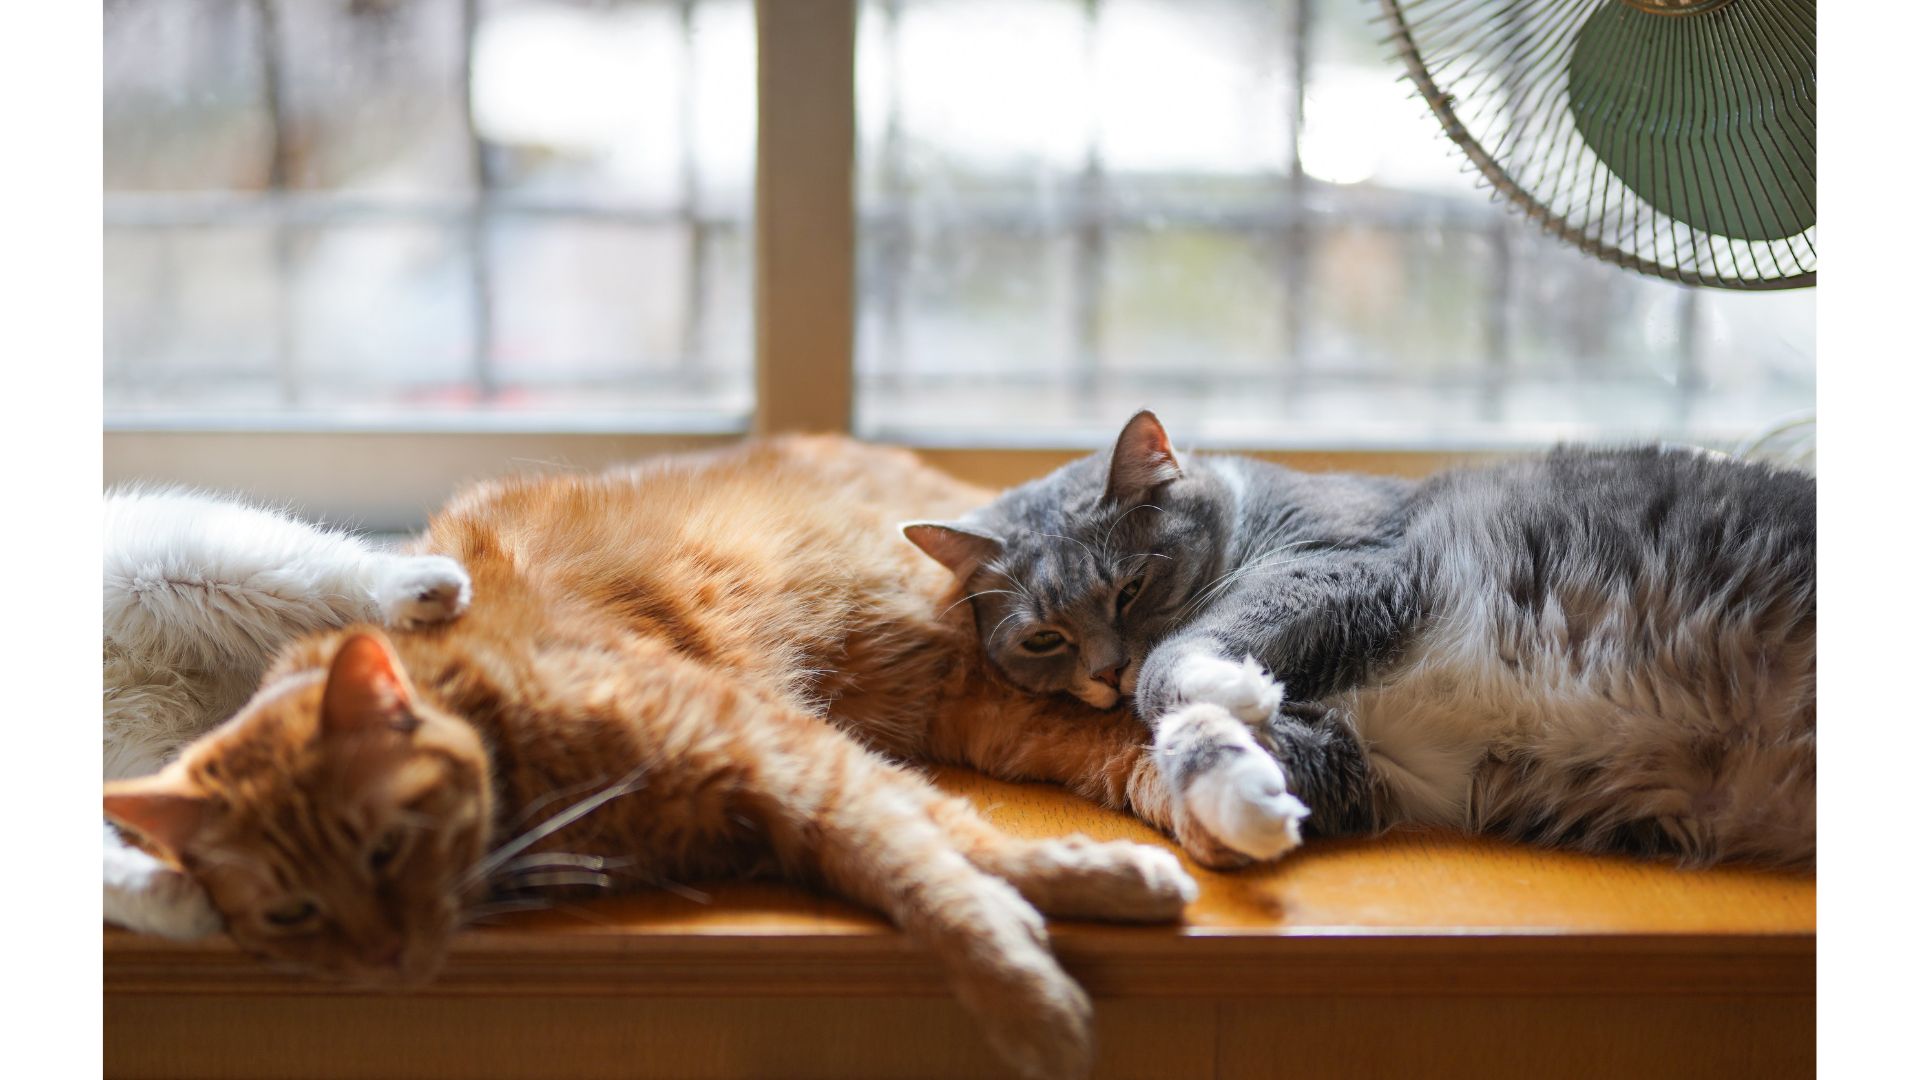 How to help your cats live together in harmony